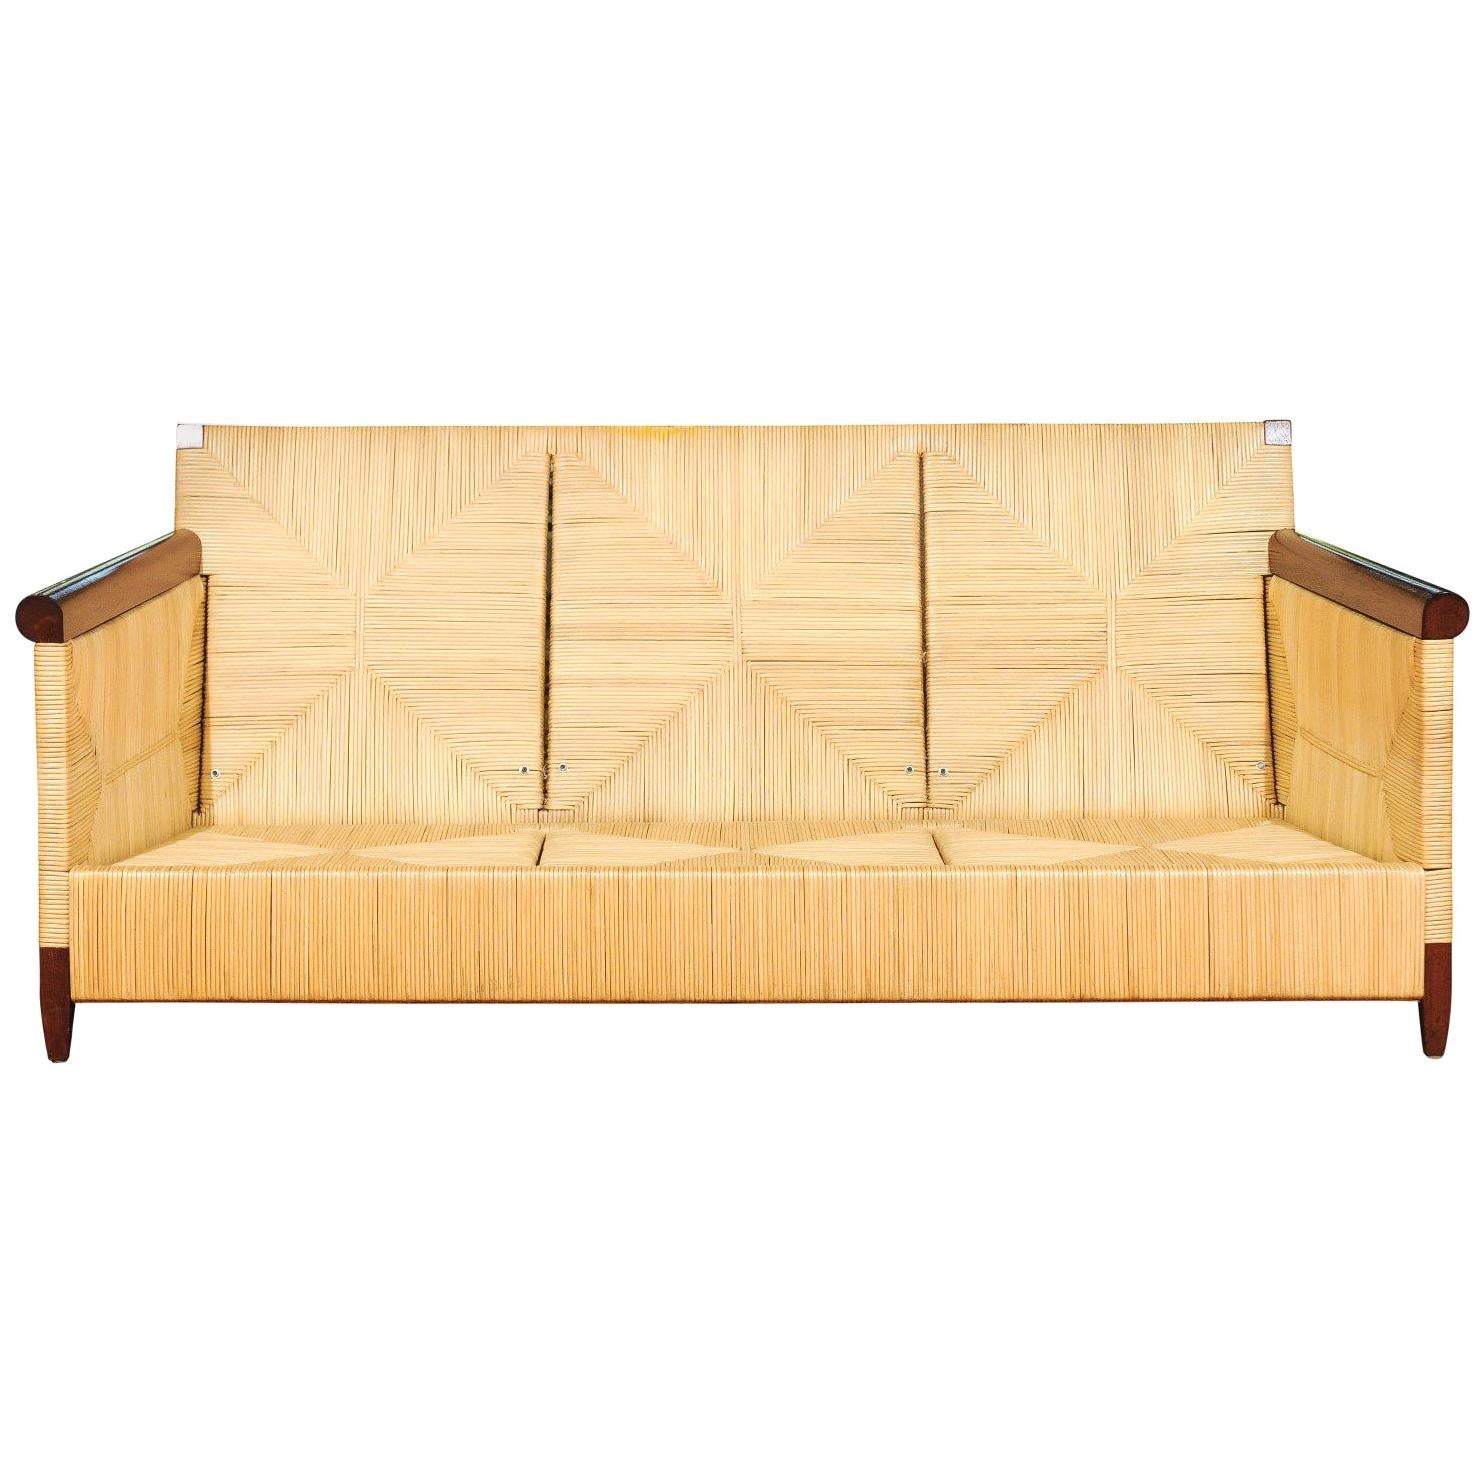 Superb Mahogany and Wicker Sofa by John Hutton for Donghia - Pair Available